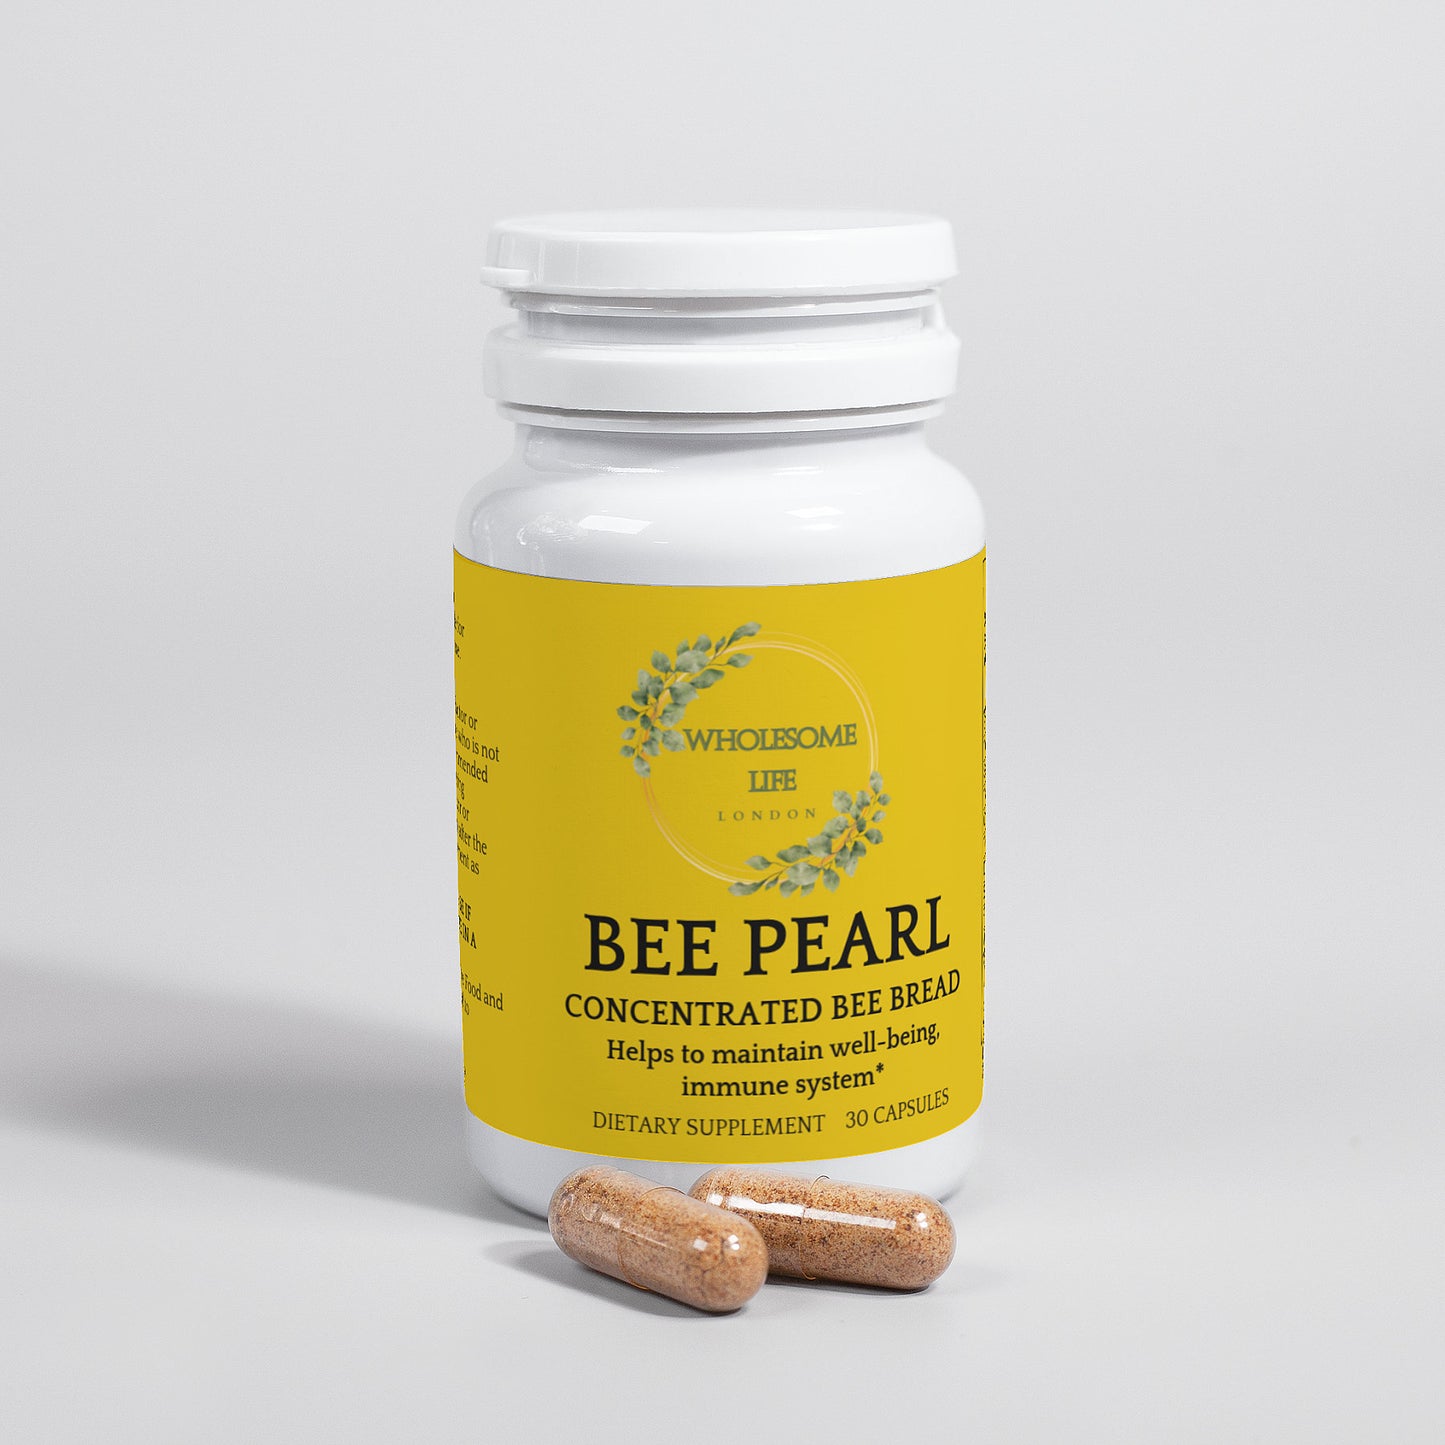 Wholesome Life London Bee Pearl 30 Count